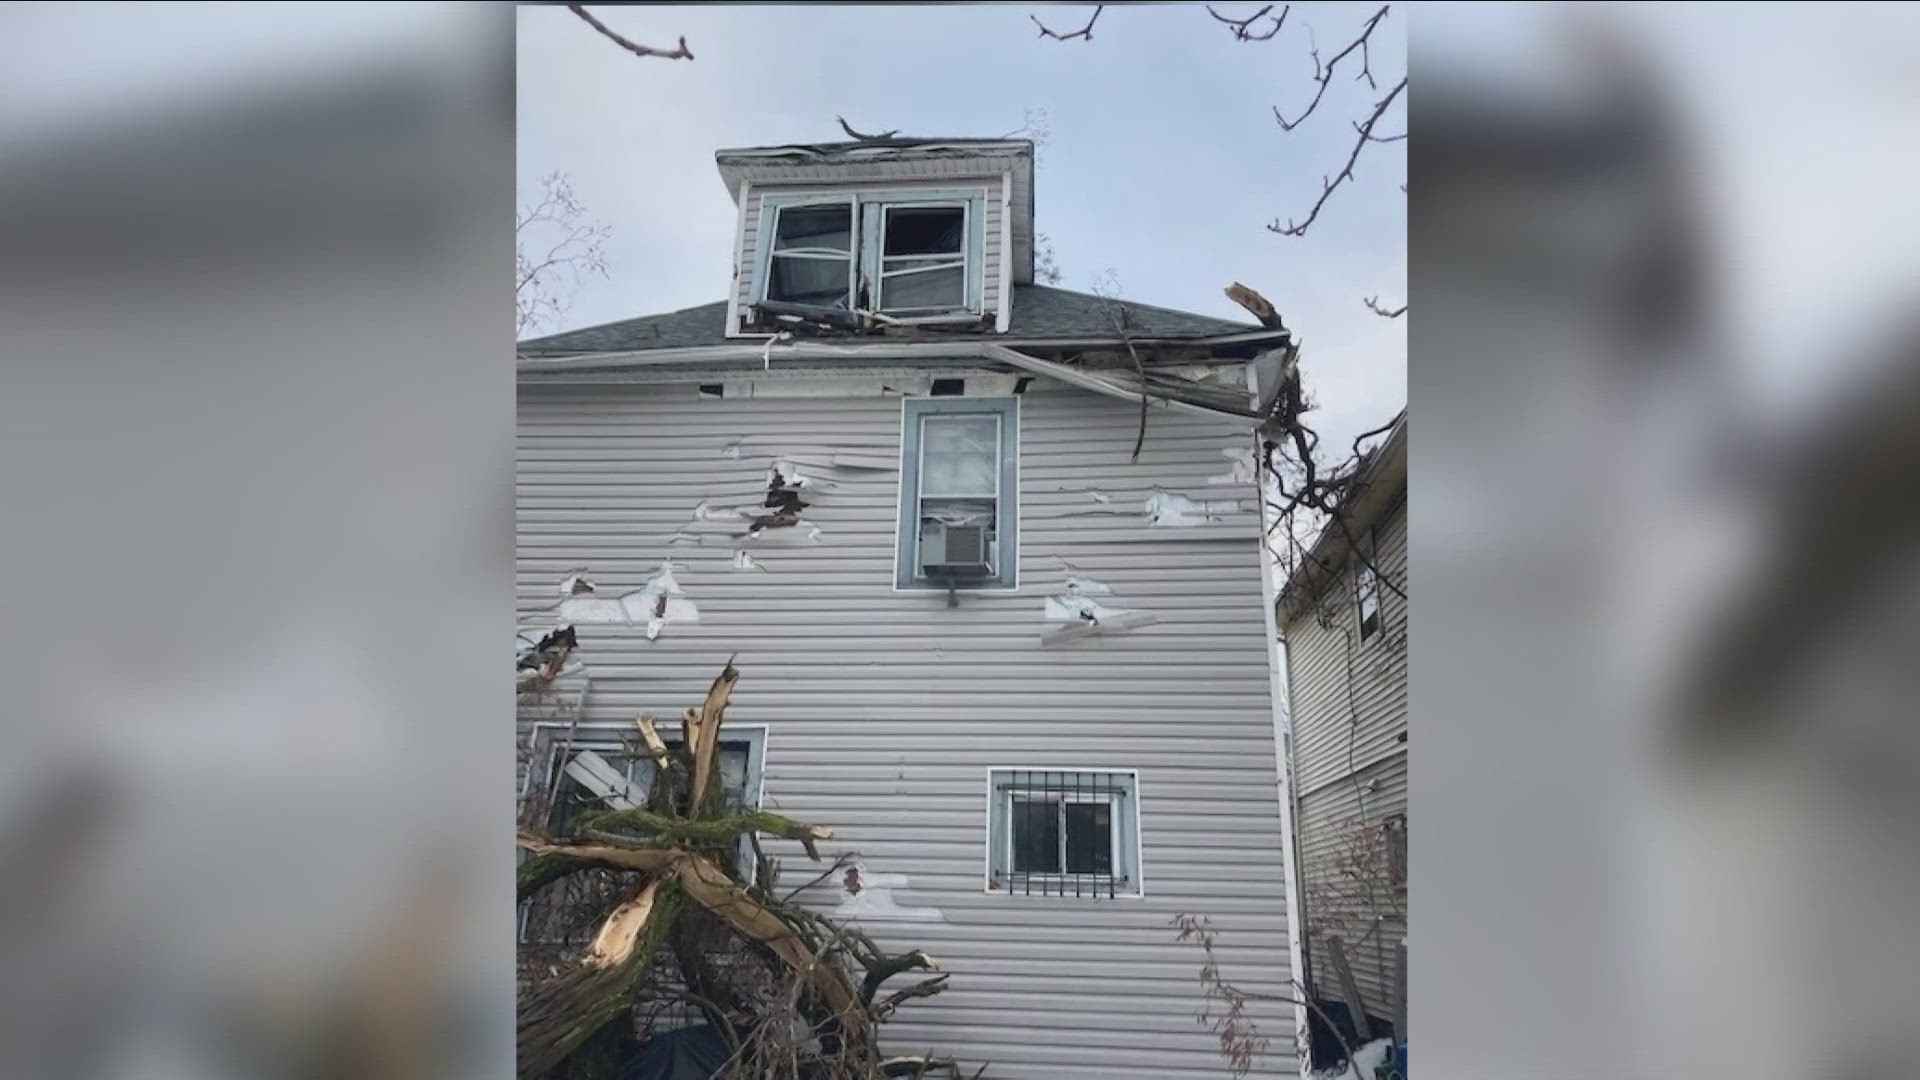 The 2022 Christmas blizzard ruined a Buffalo family's home.  They have been displaced for almost a year due to contractors not completing the job.